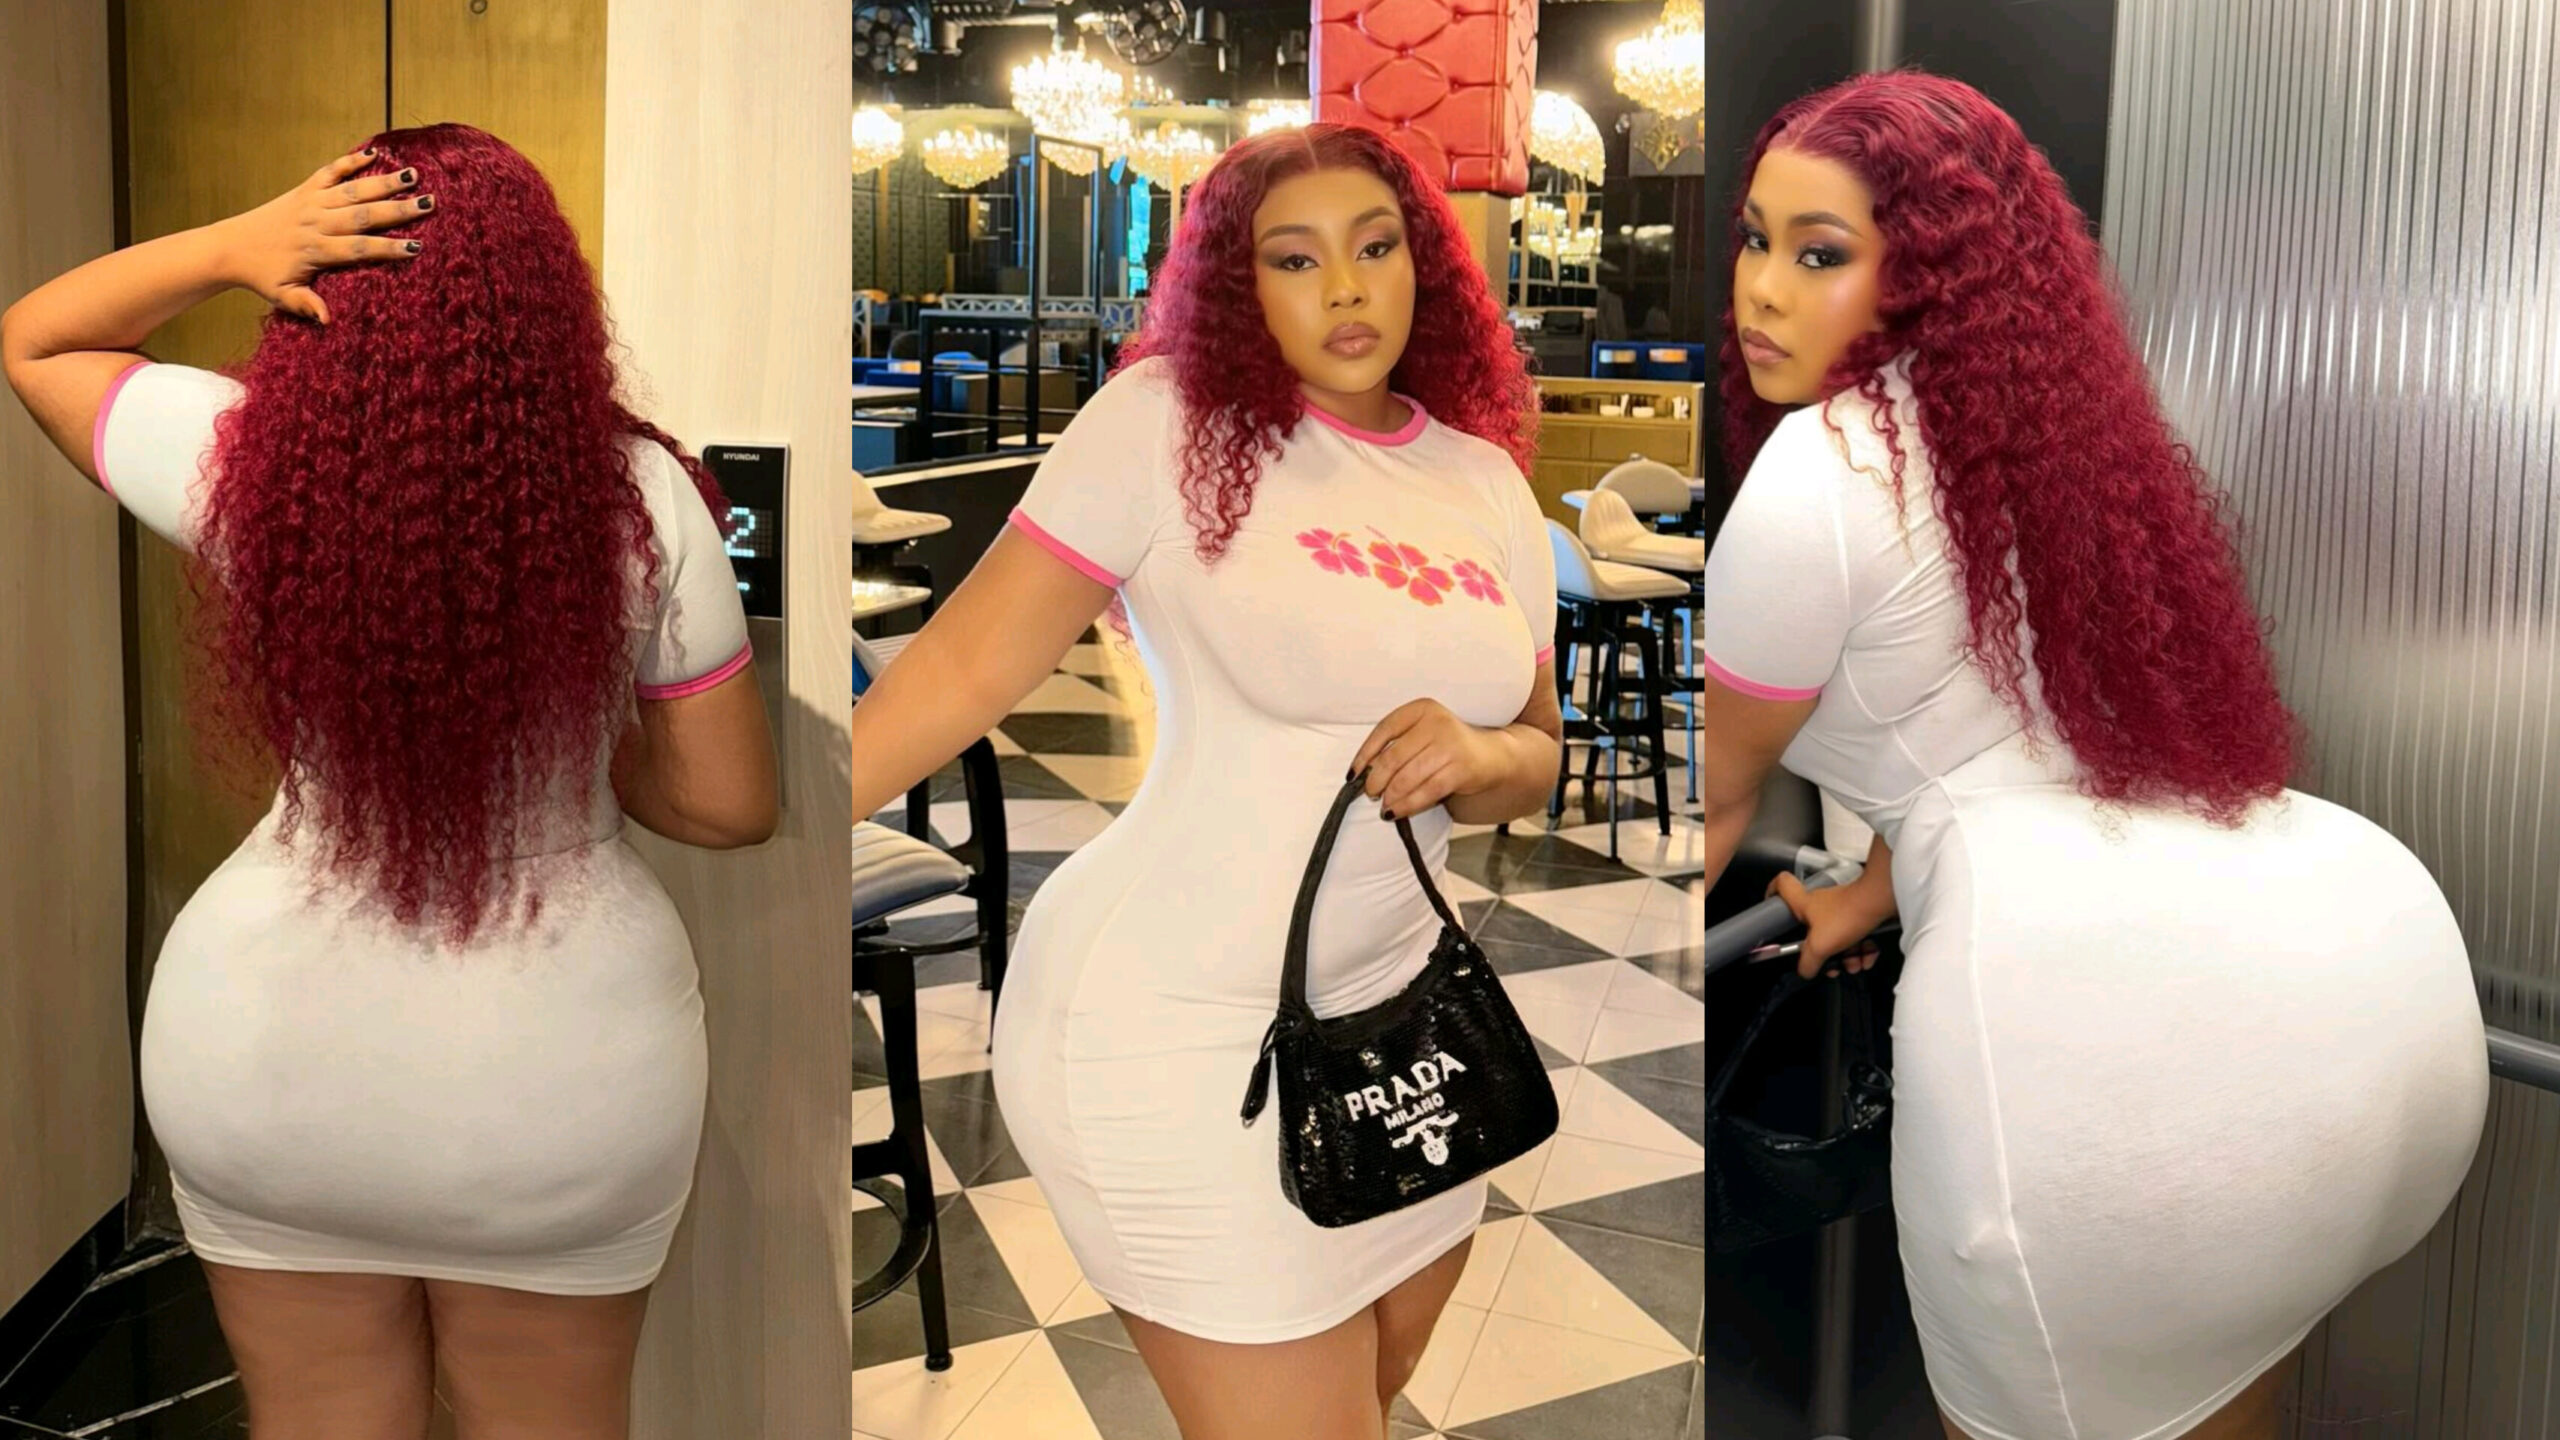 Meet beautiful 19 years old single lady who is naturally from Nigeria ...